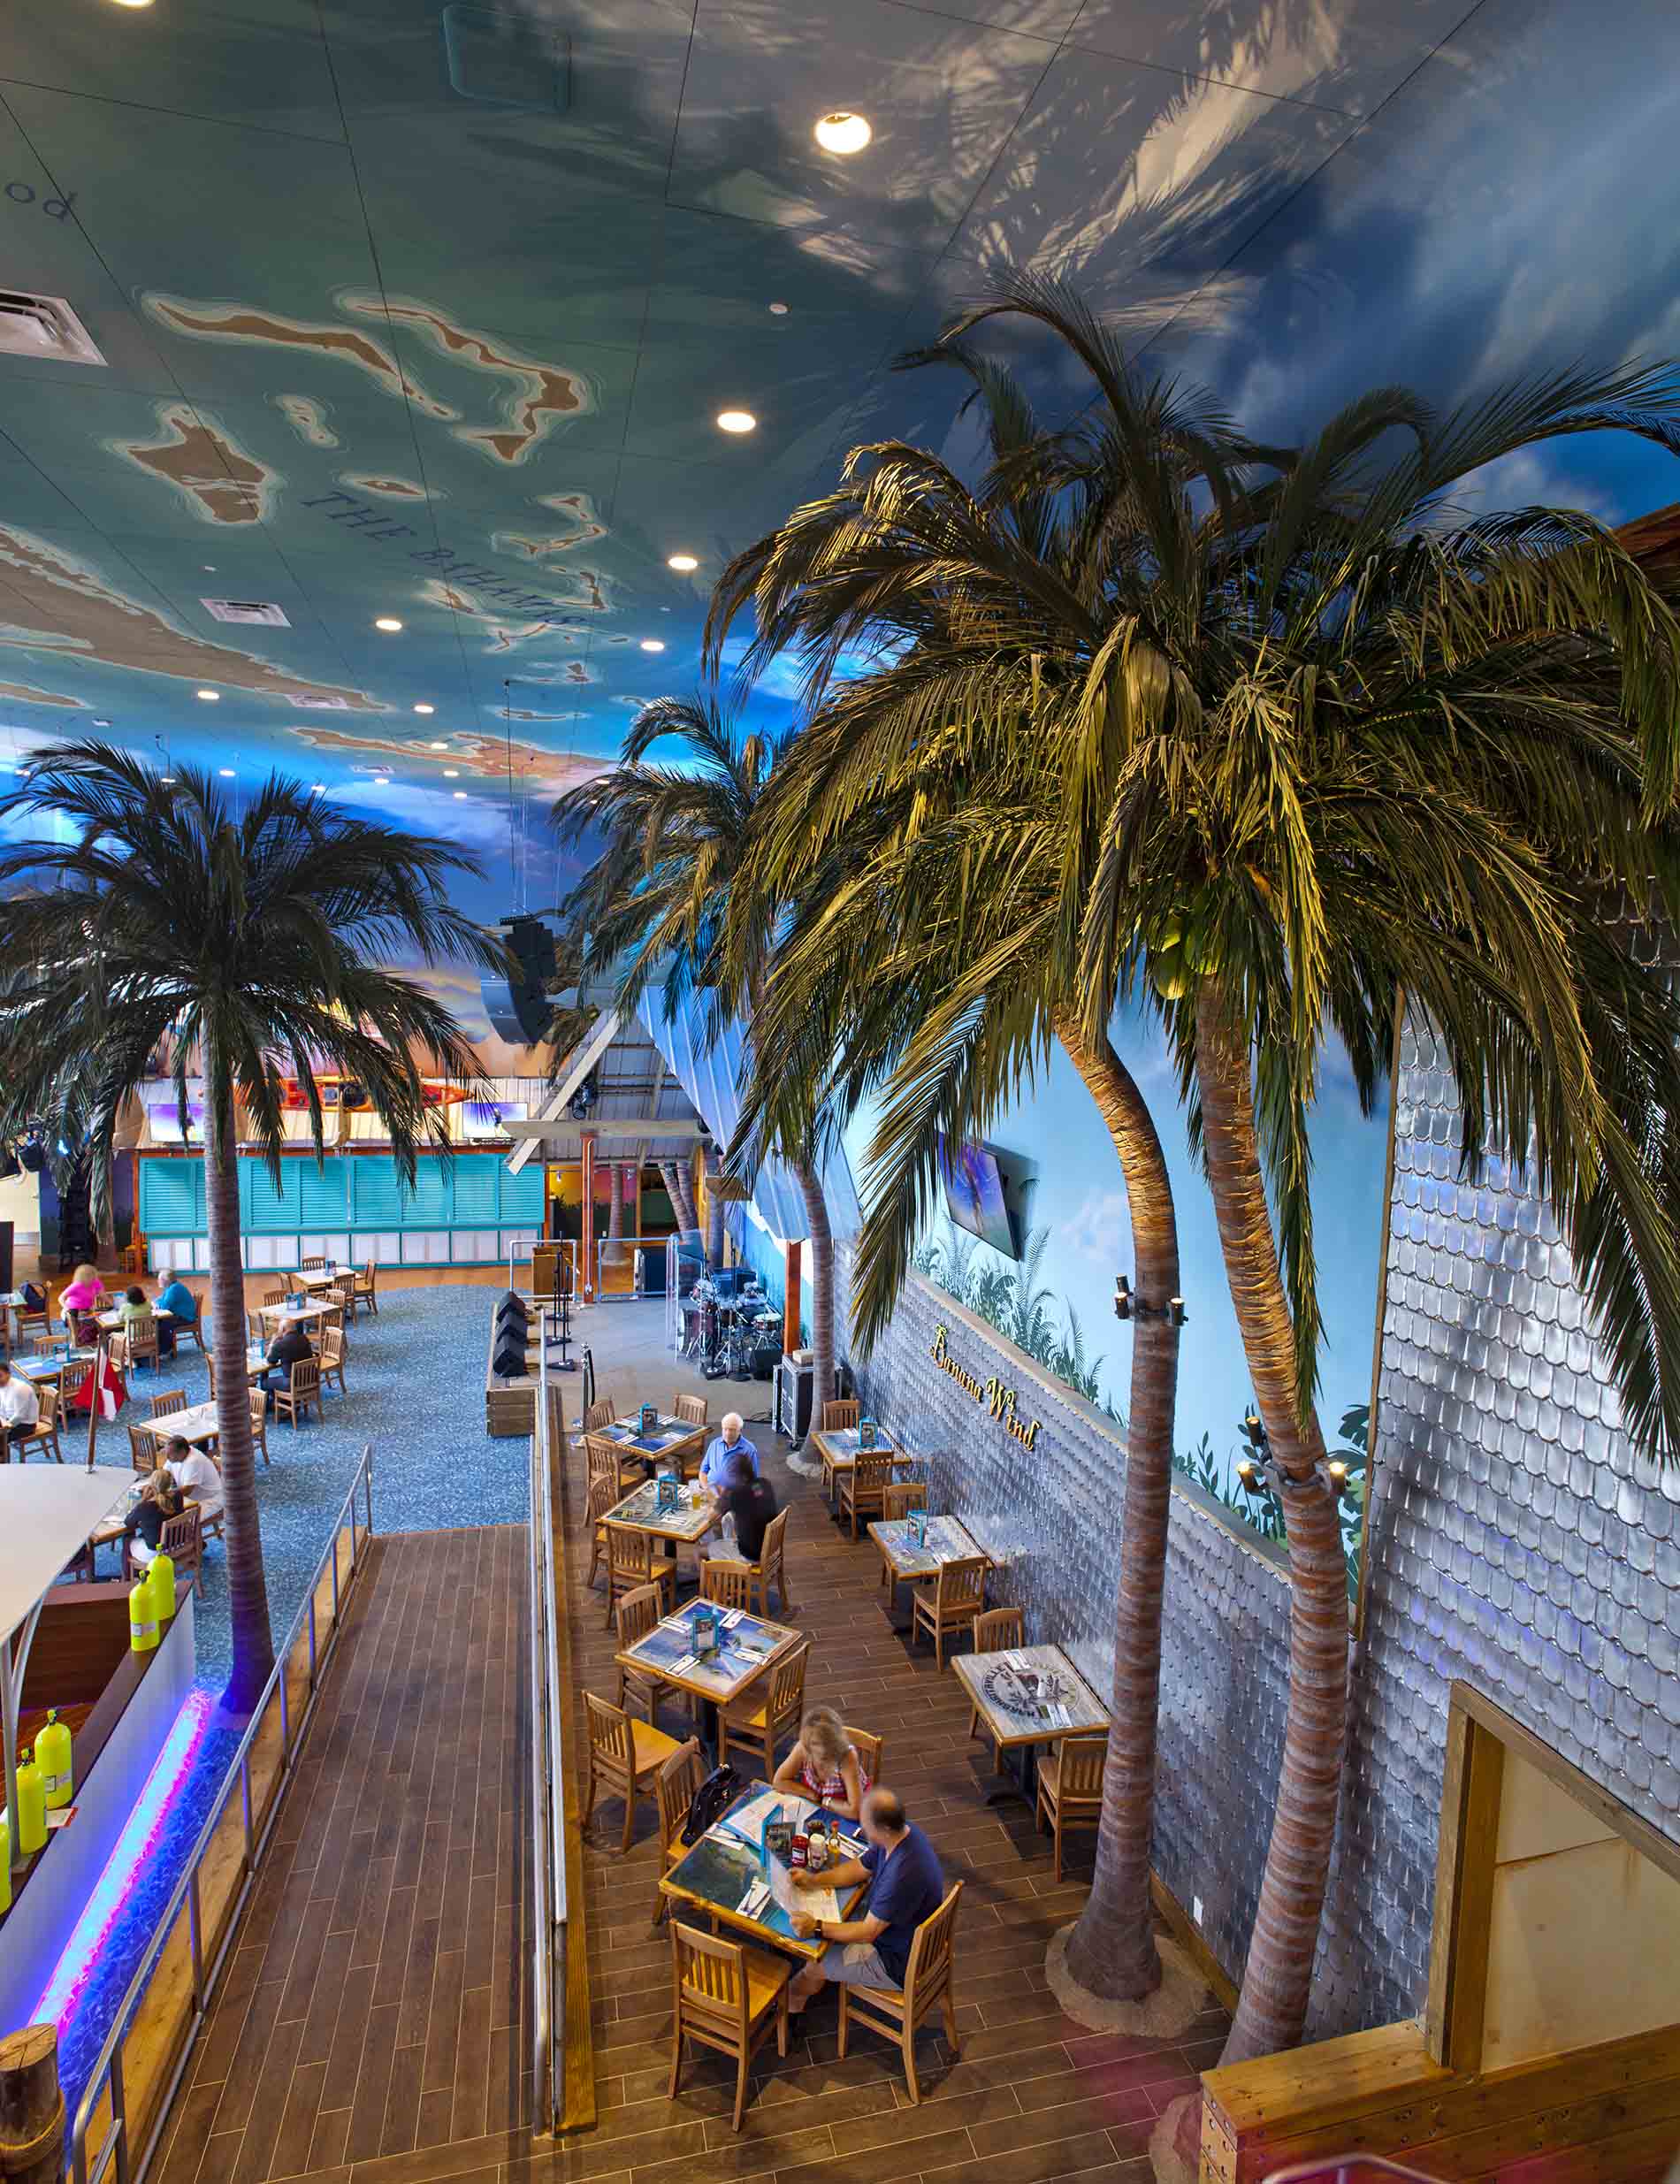 High angle floor to ceiling view showing dining area & Fabricated Coconut Palm Trees at Margaritaville Restaurant, Las Vegas